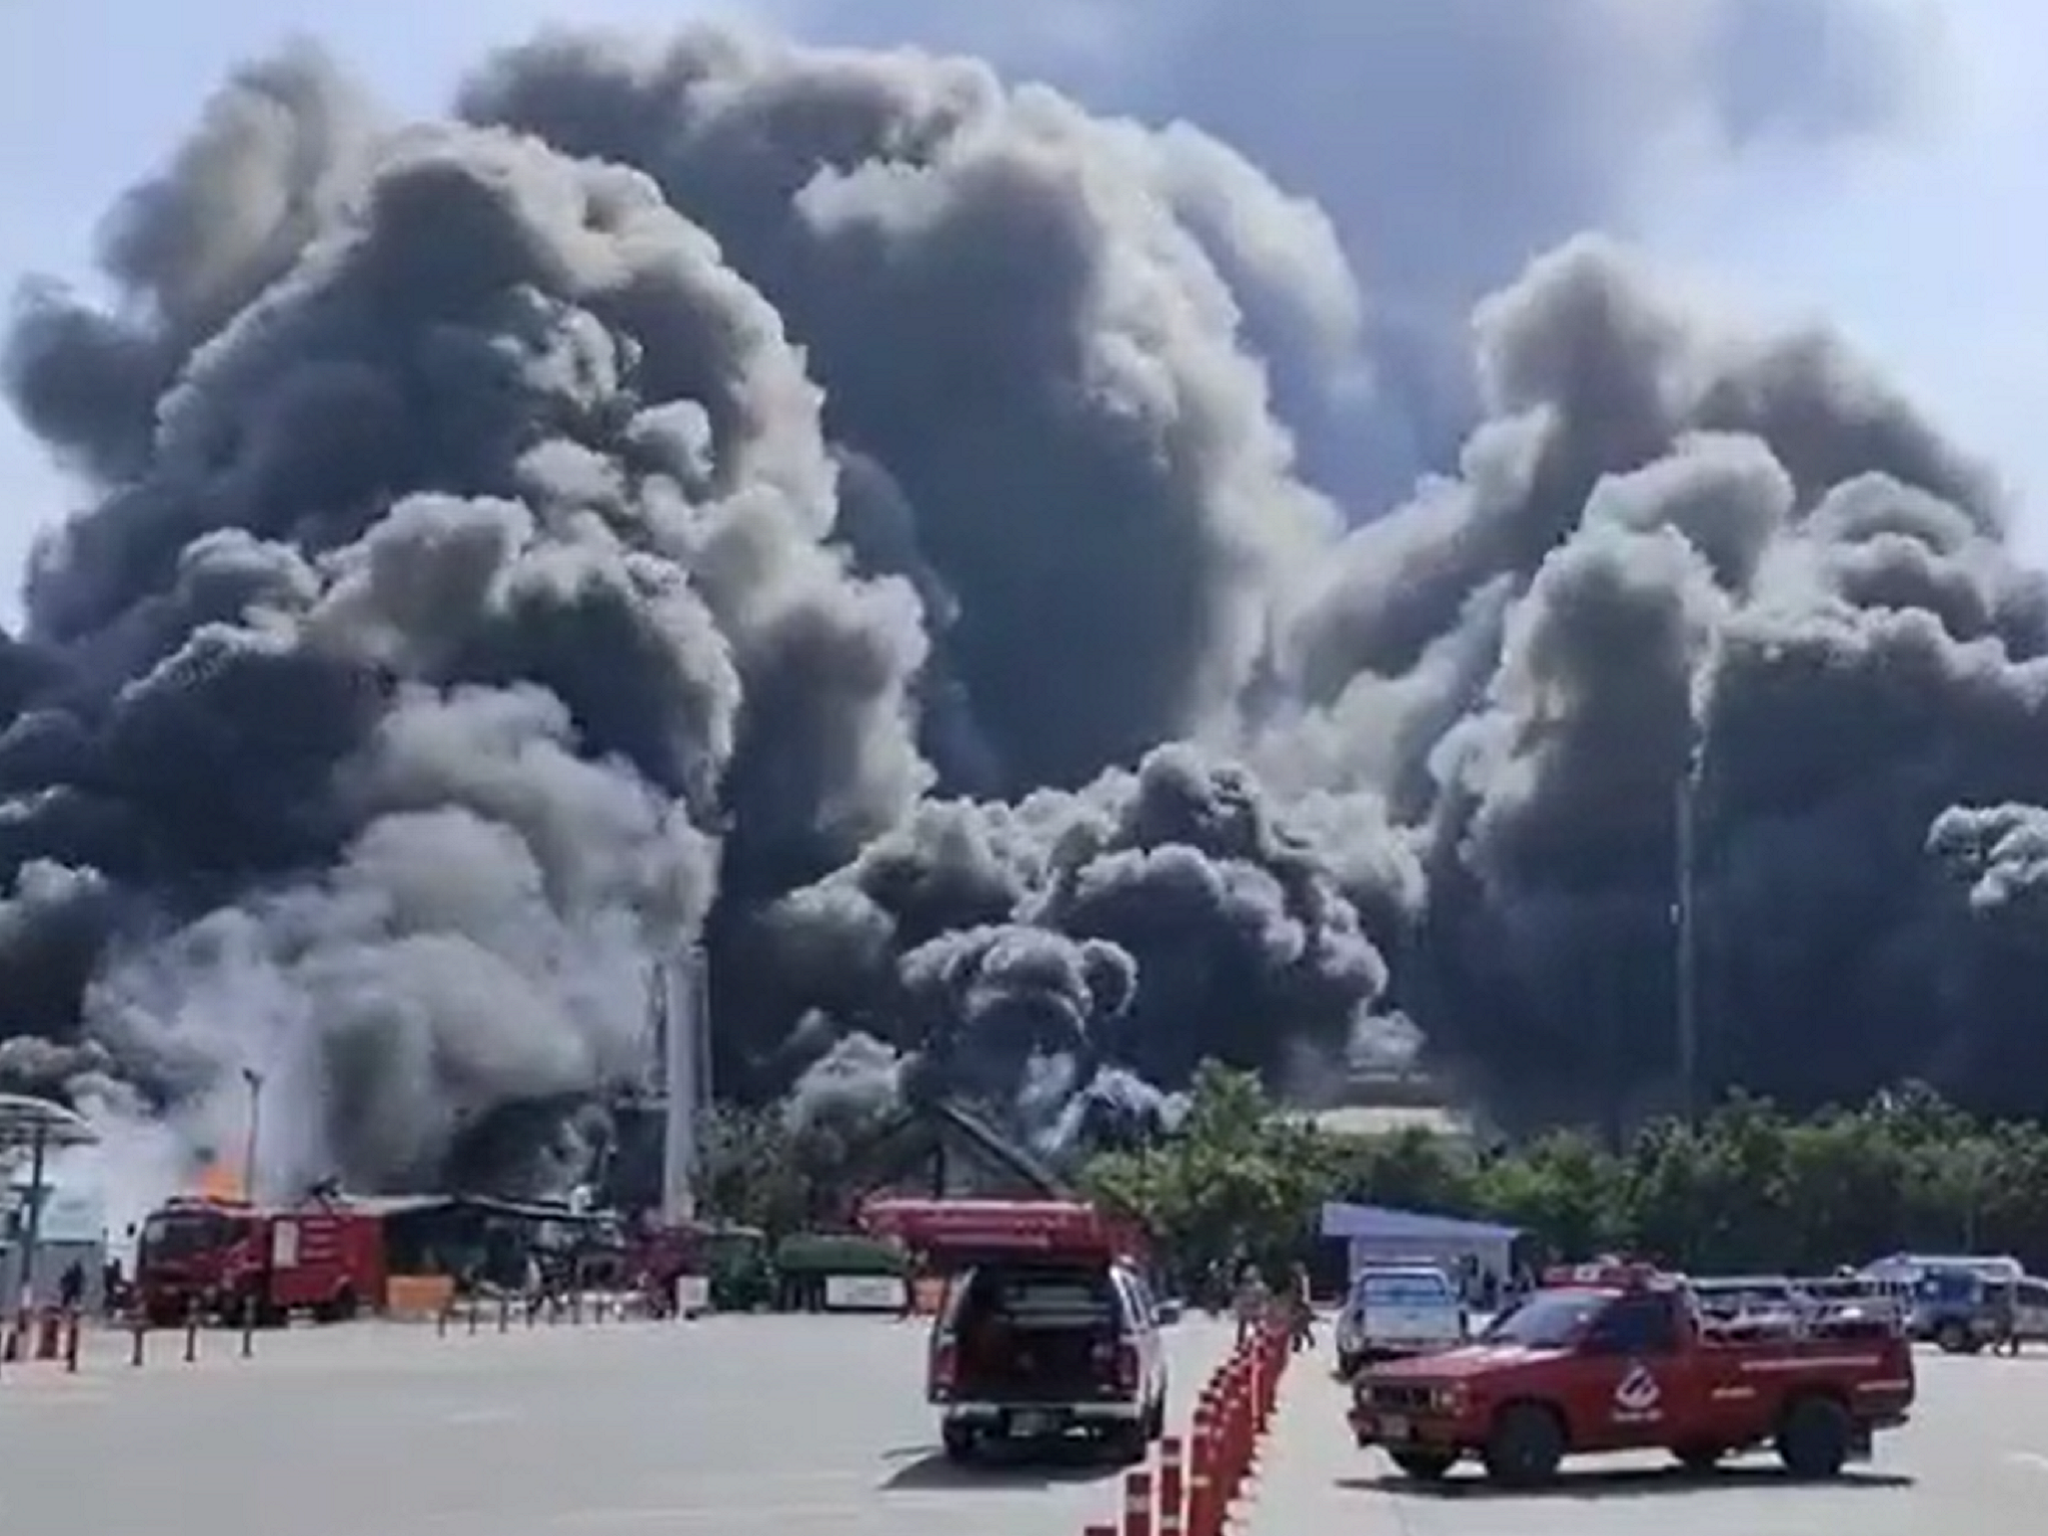 A woman allegedly blew up the oil warehouse where she worked in Thailand because she was angry with her boss